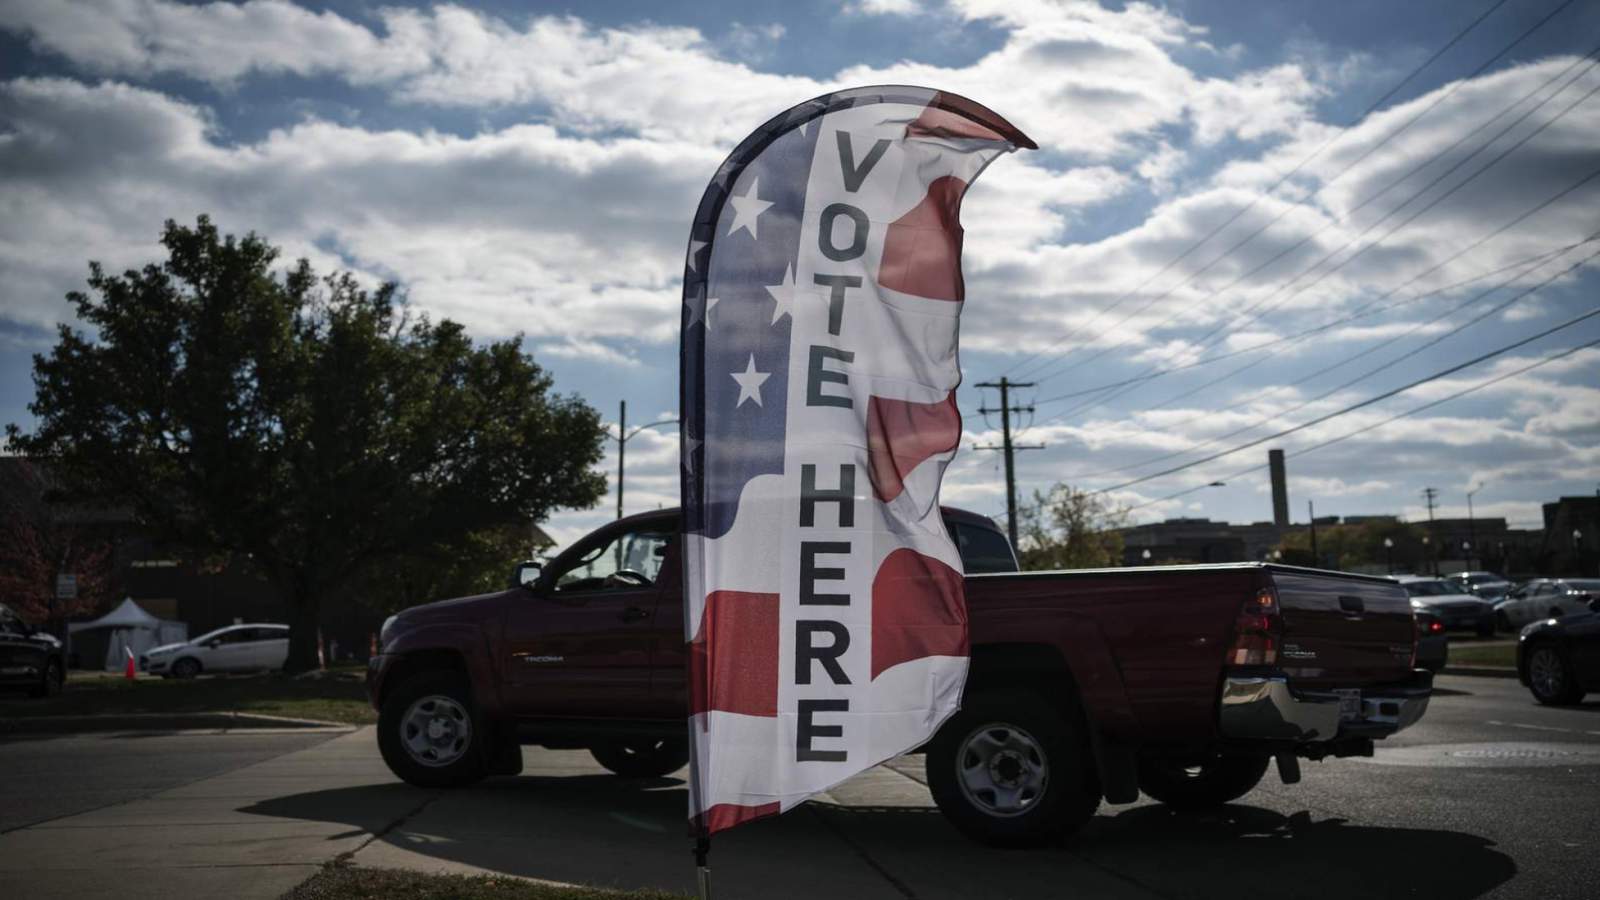 5 things to watch on Election Day in Texas